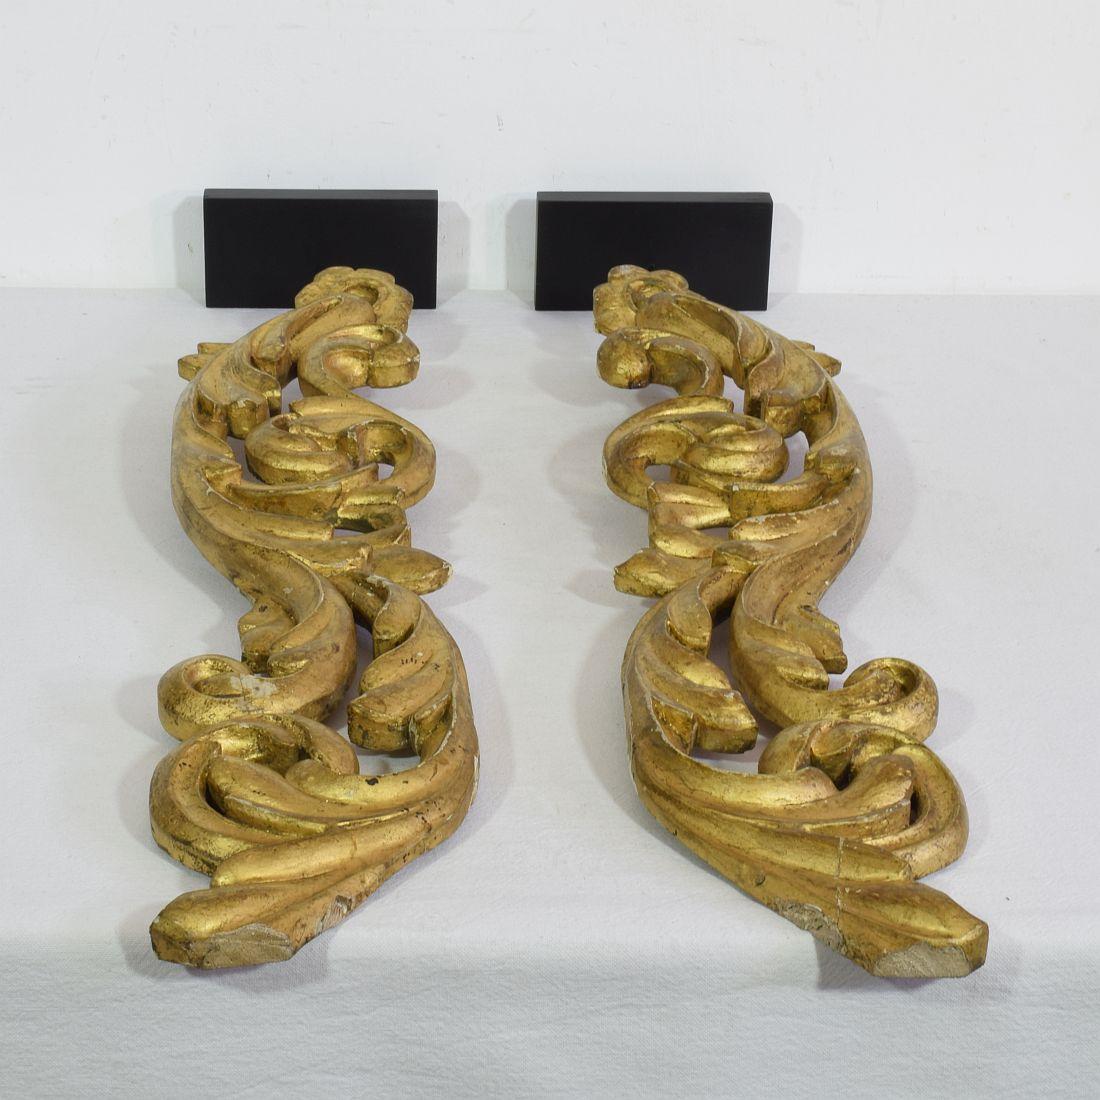 Pair of Large 19th Century Italian Giltwood Baroque Style Ornaments 14